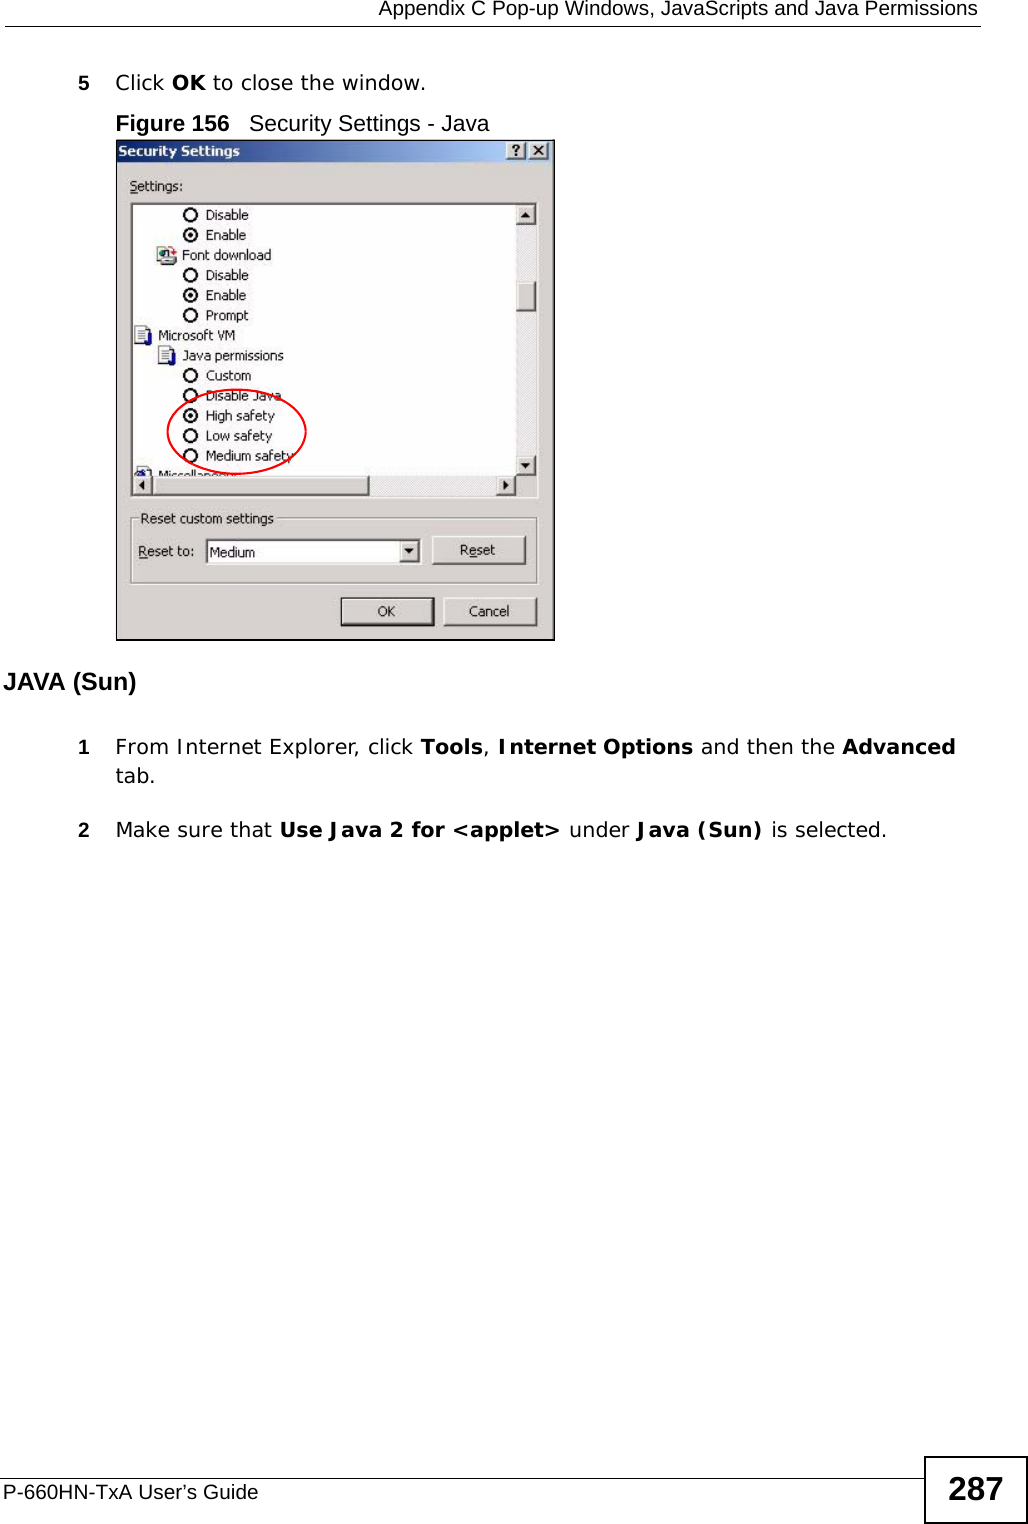  Appendix C Pop-up Windows, JavaScripts and Java PermissionsP-660HN-TxA User’s Guide 2875Click OK to close the window.Figure 156   Security Settings - Java JAVA (Sun)1From Internet Explorer, click Tools, Internet Options and then the Advanced tab. 2Make sure that Use Java 2 for &lt;applet&gt; under Java (Sun) is selected.